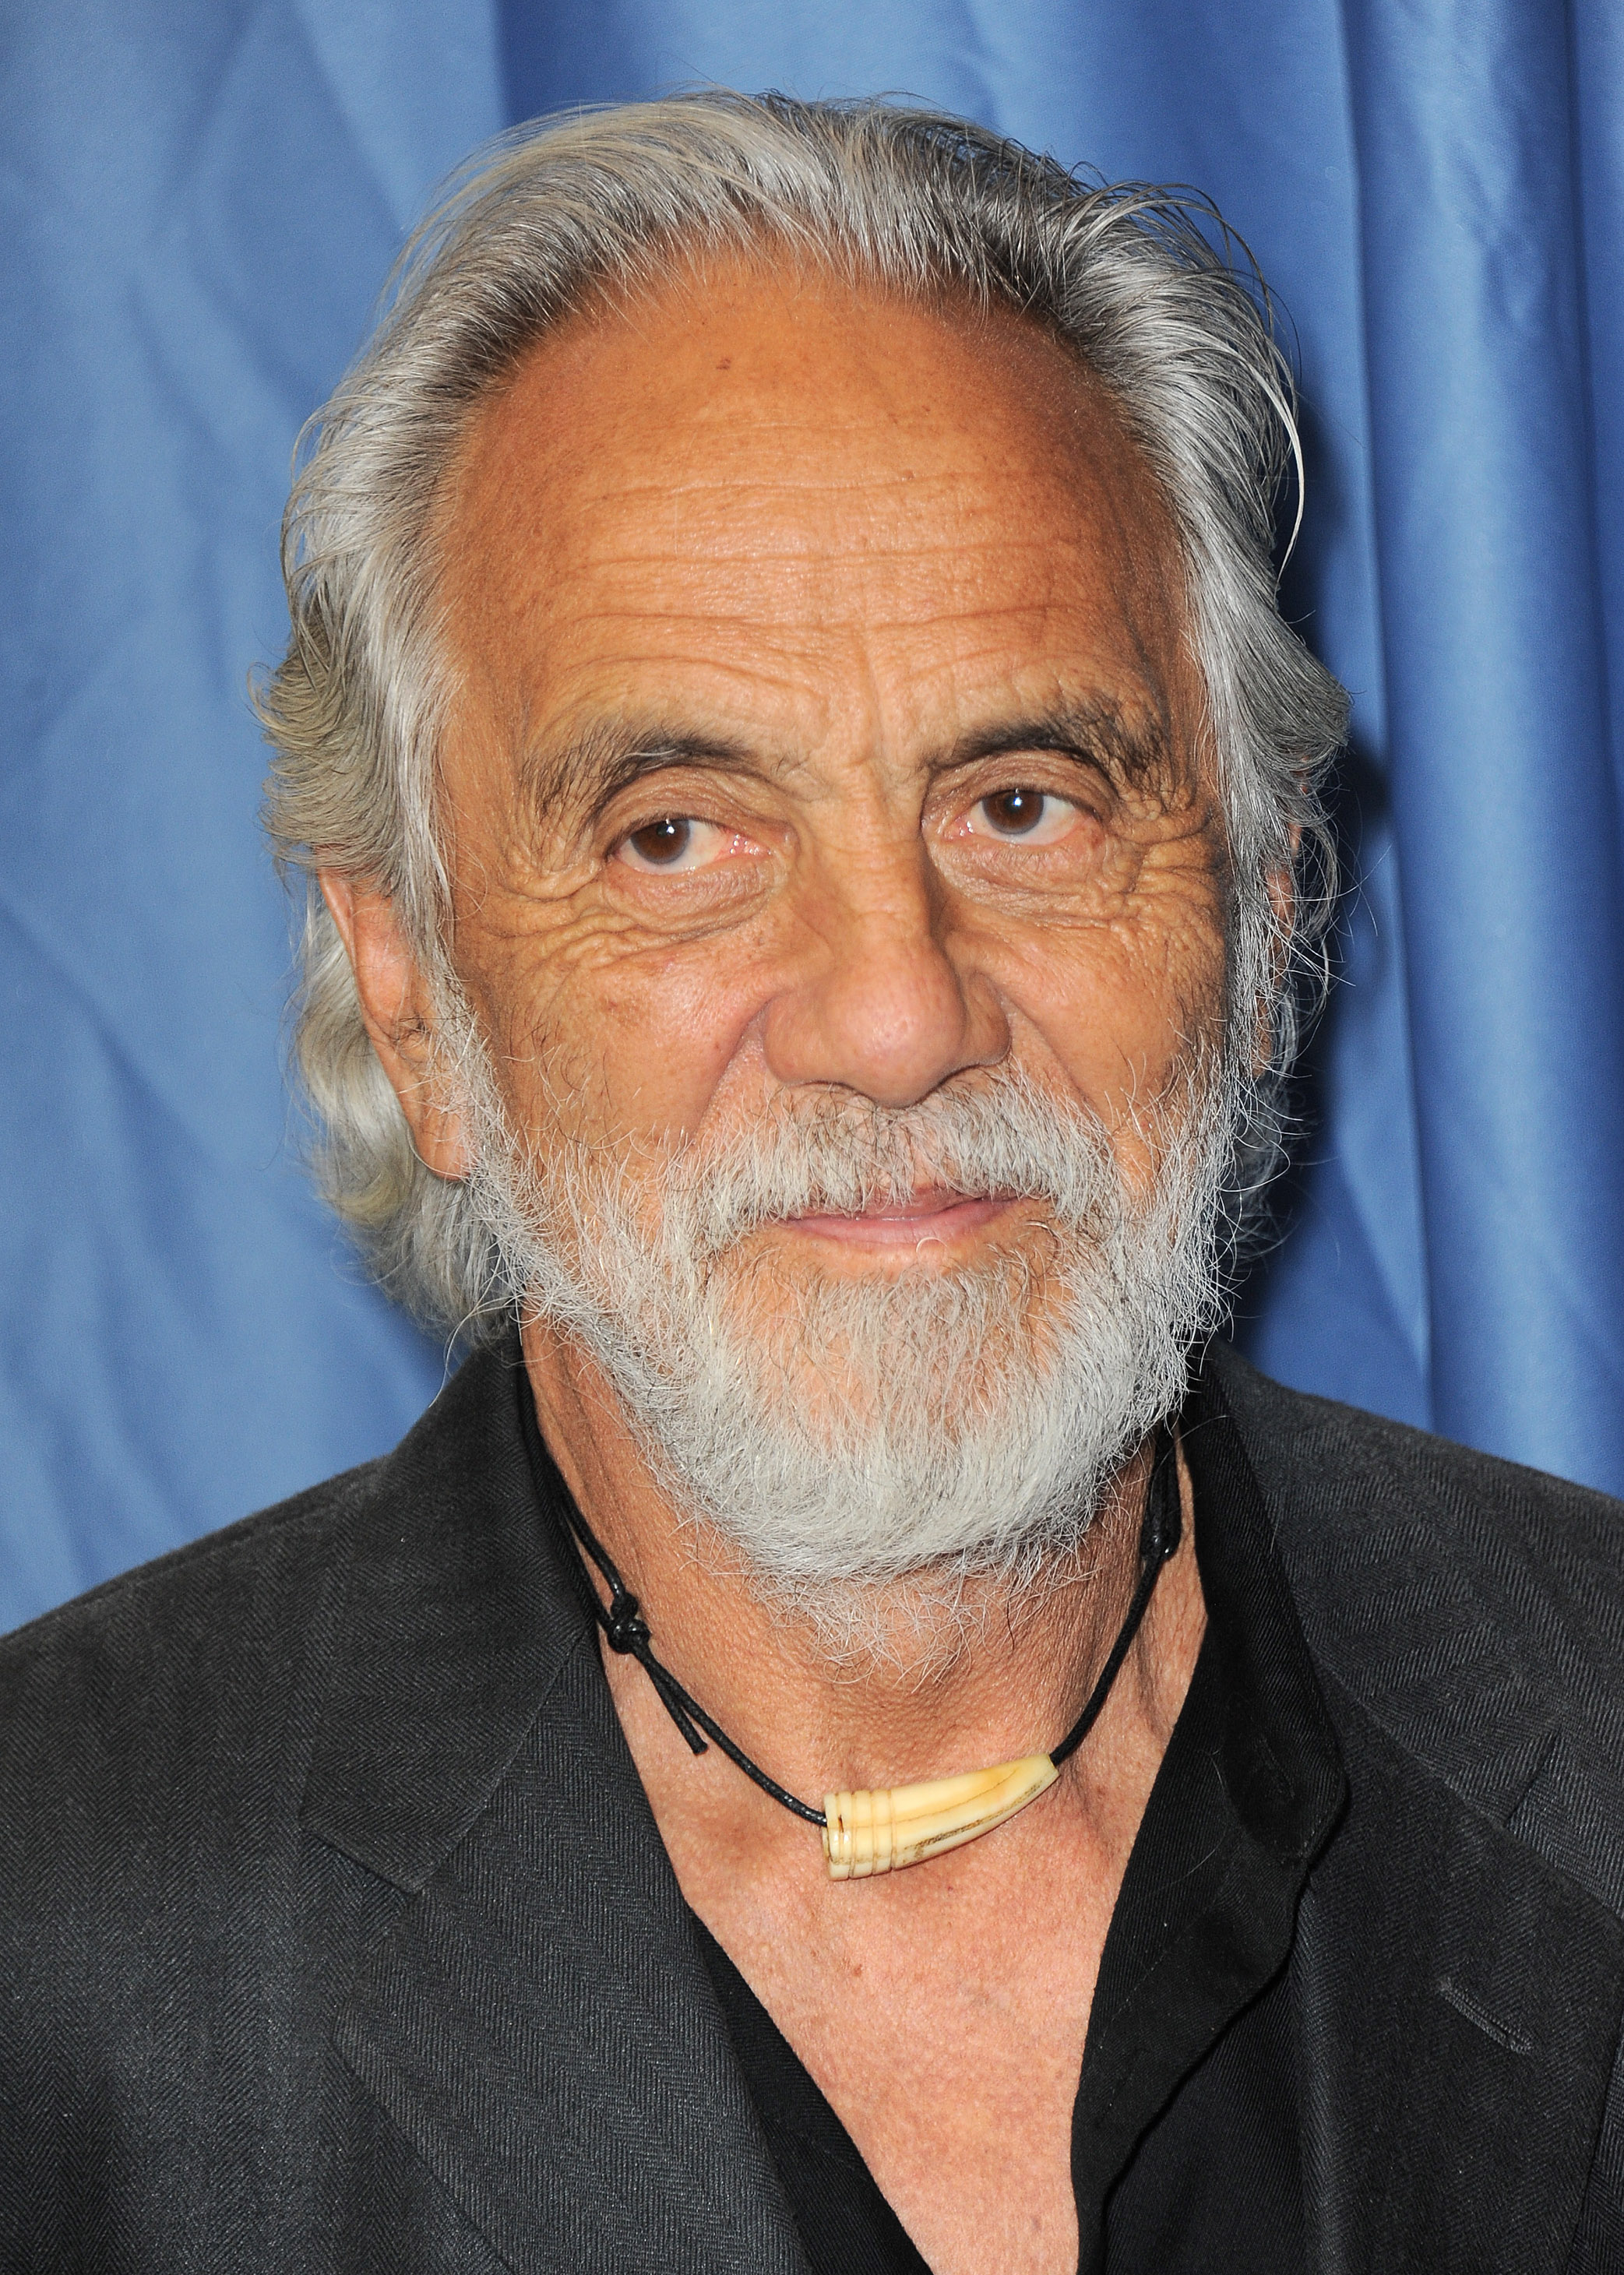 Tommy Chong speaks out on pot | The Spokesman-Review2085 x 2921